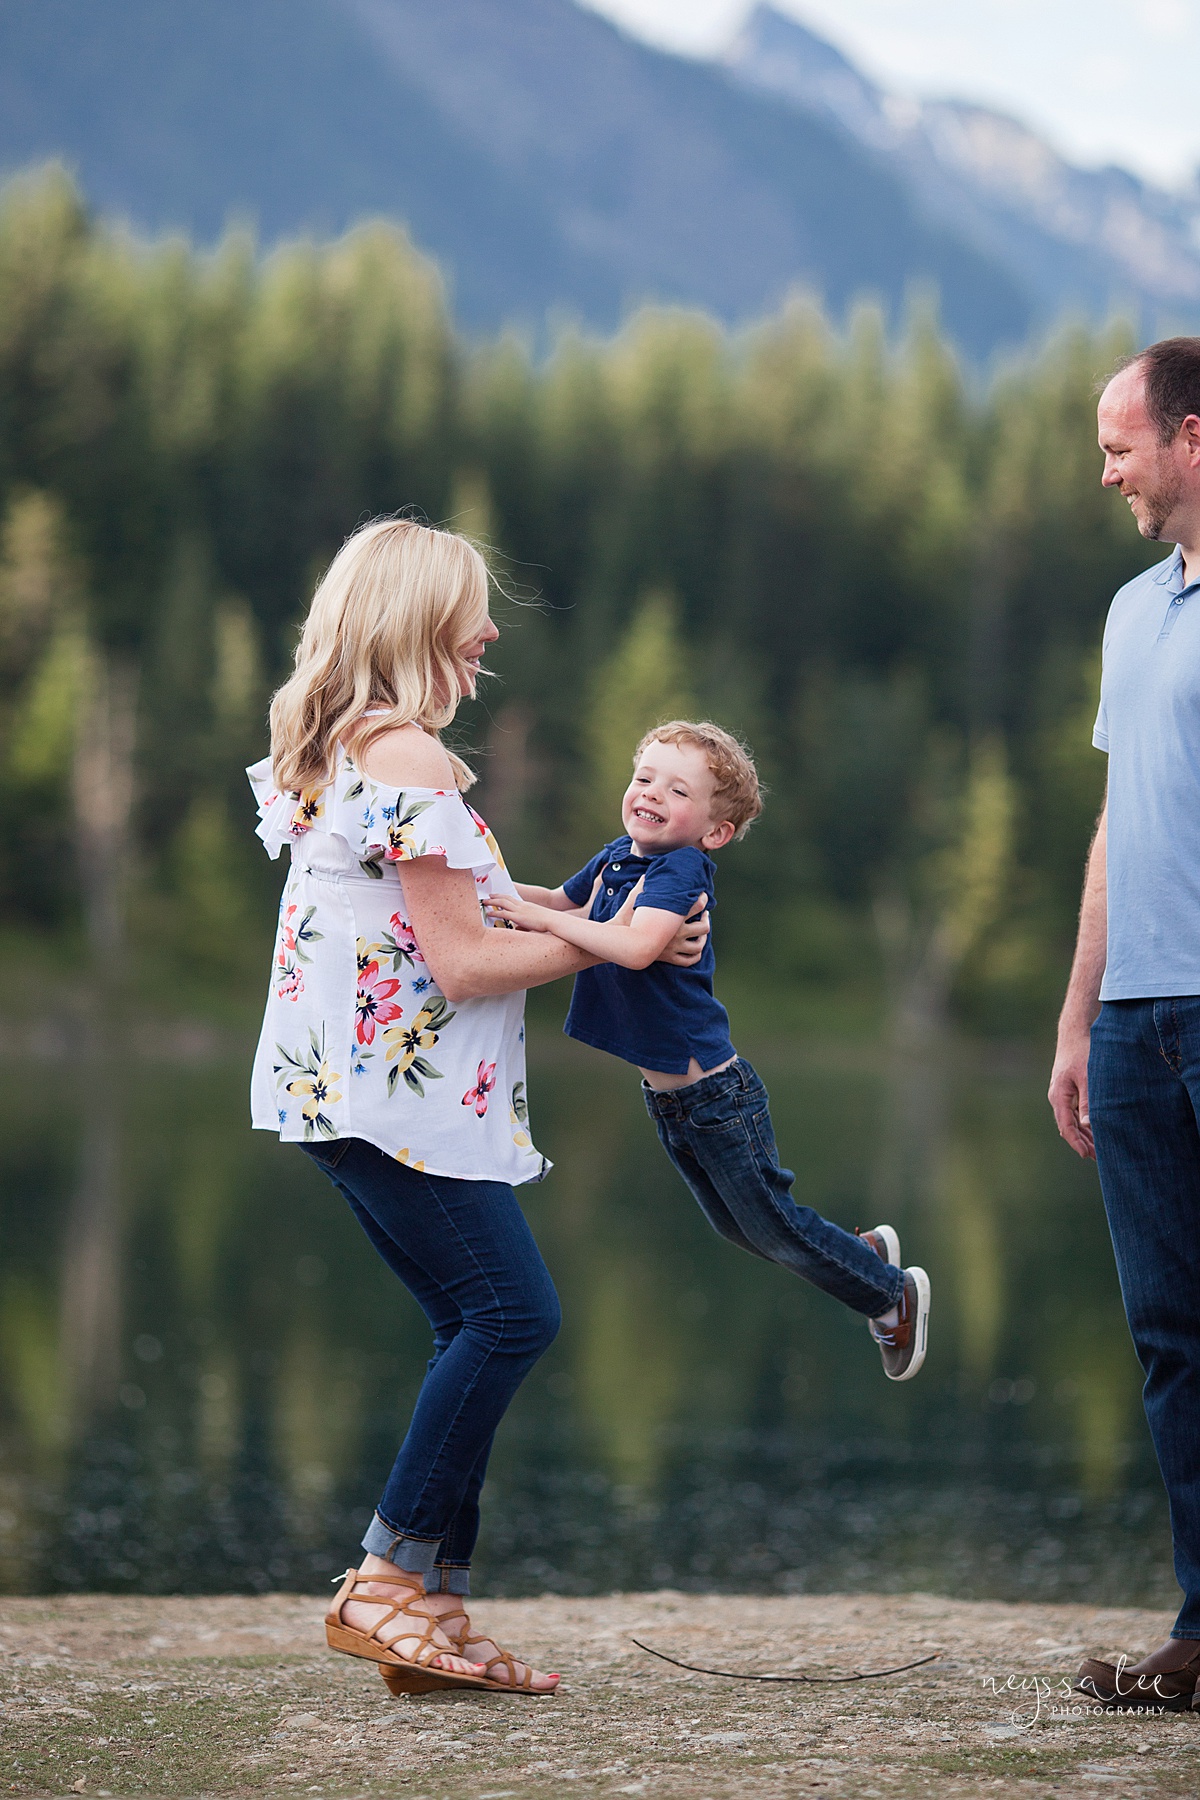 Maternity Photos in the Mountains, Gold Creek Pond, Neyssa Lee Photography, Snoqualmie Family Photographer, Pregnant Mom spins with son